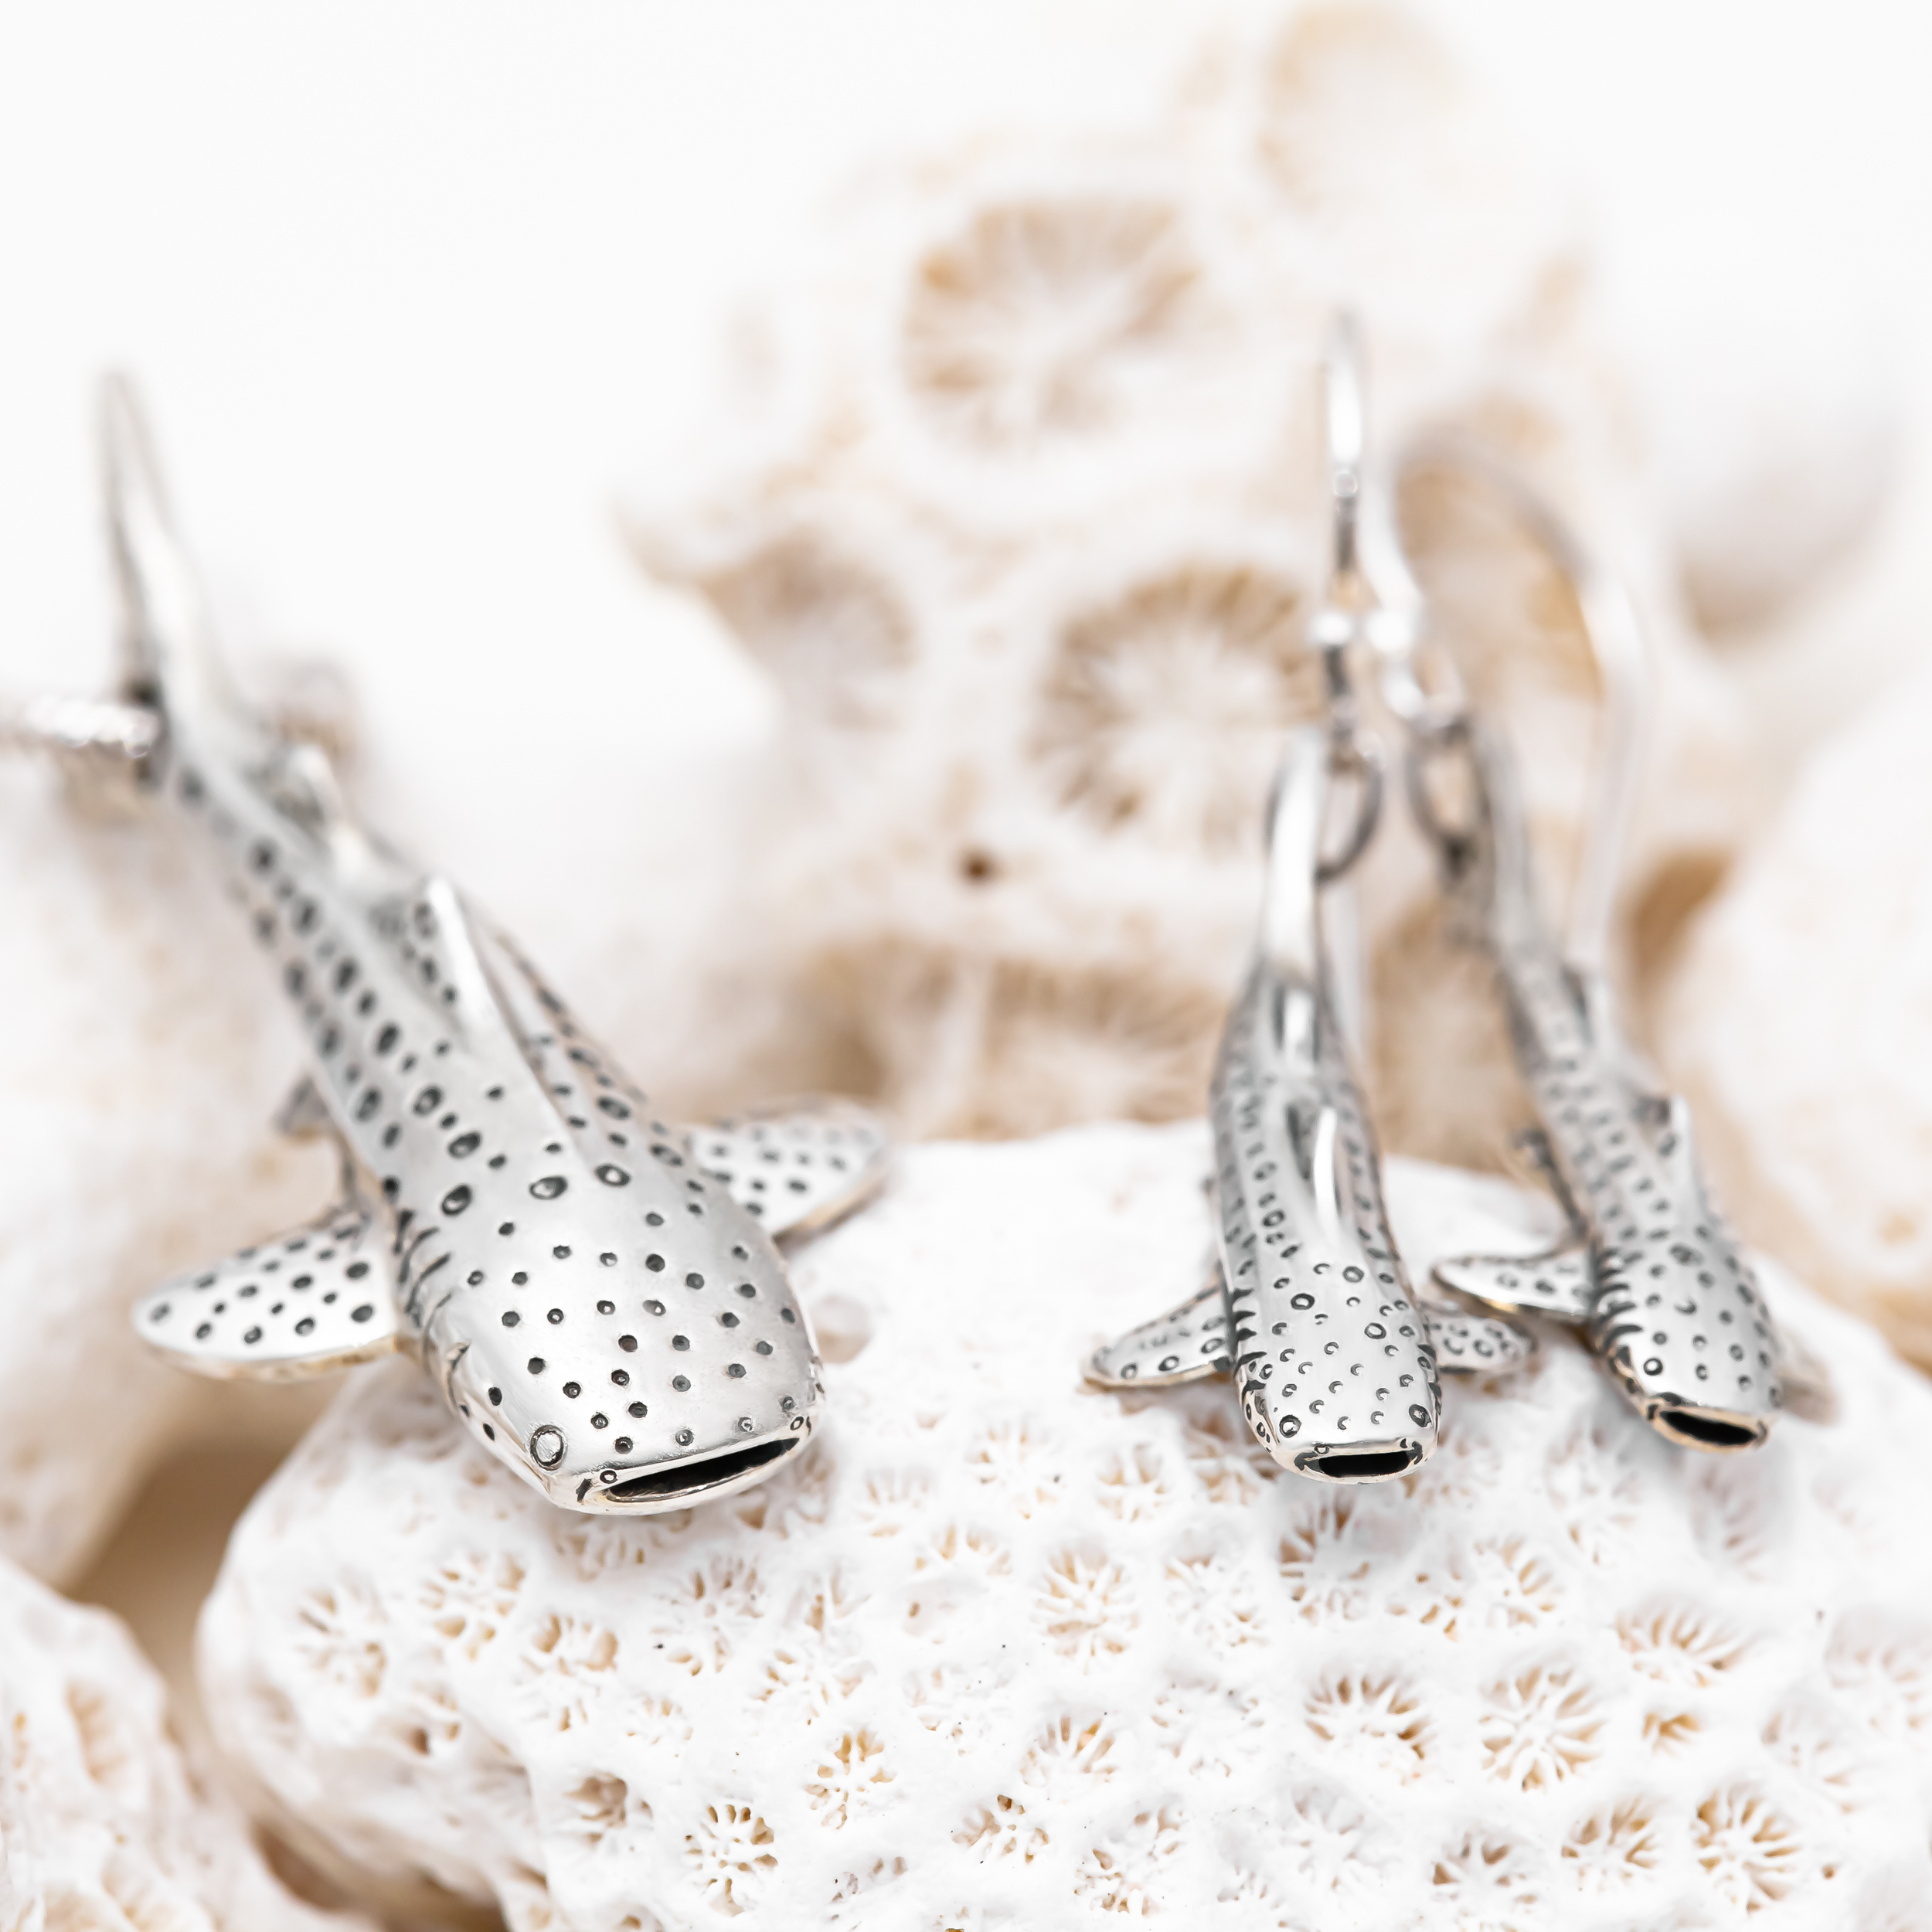 Silver Whale Shark Earrings and Necklace set by World Treasure Designs